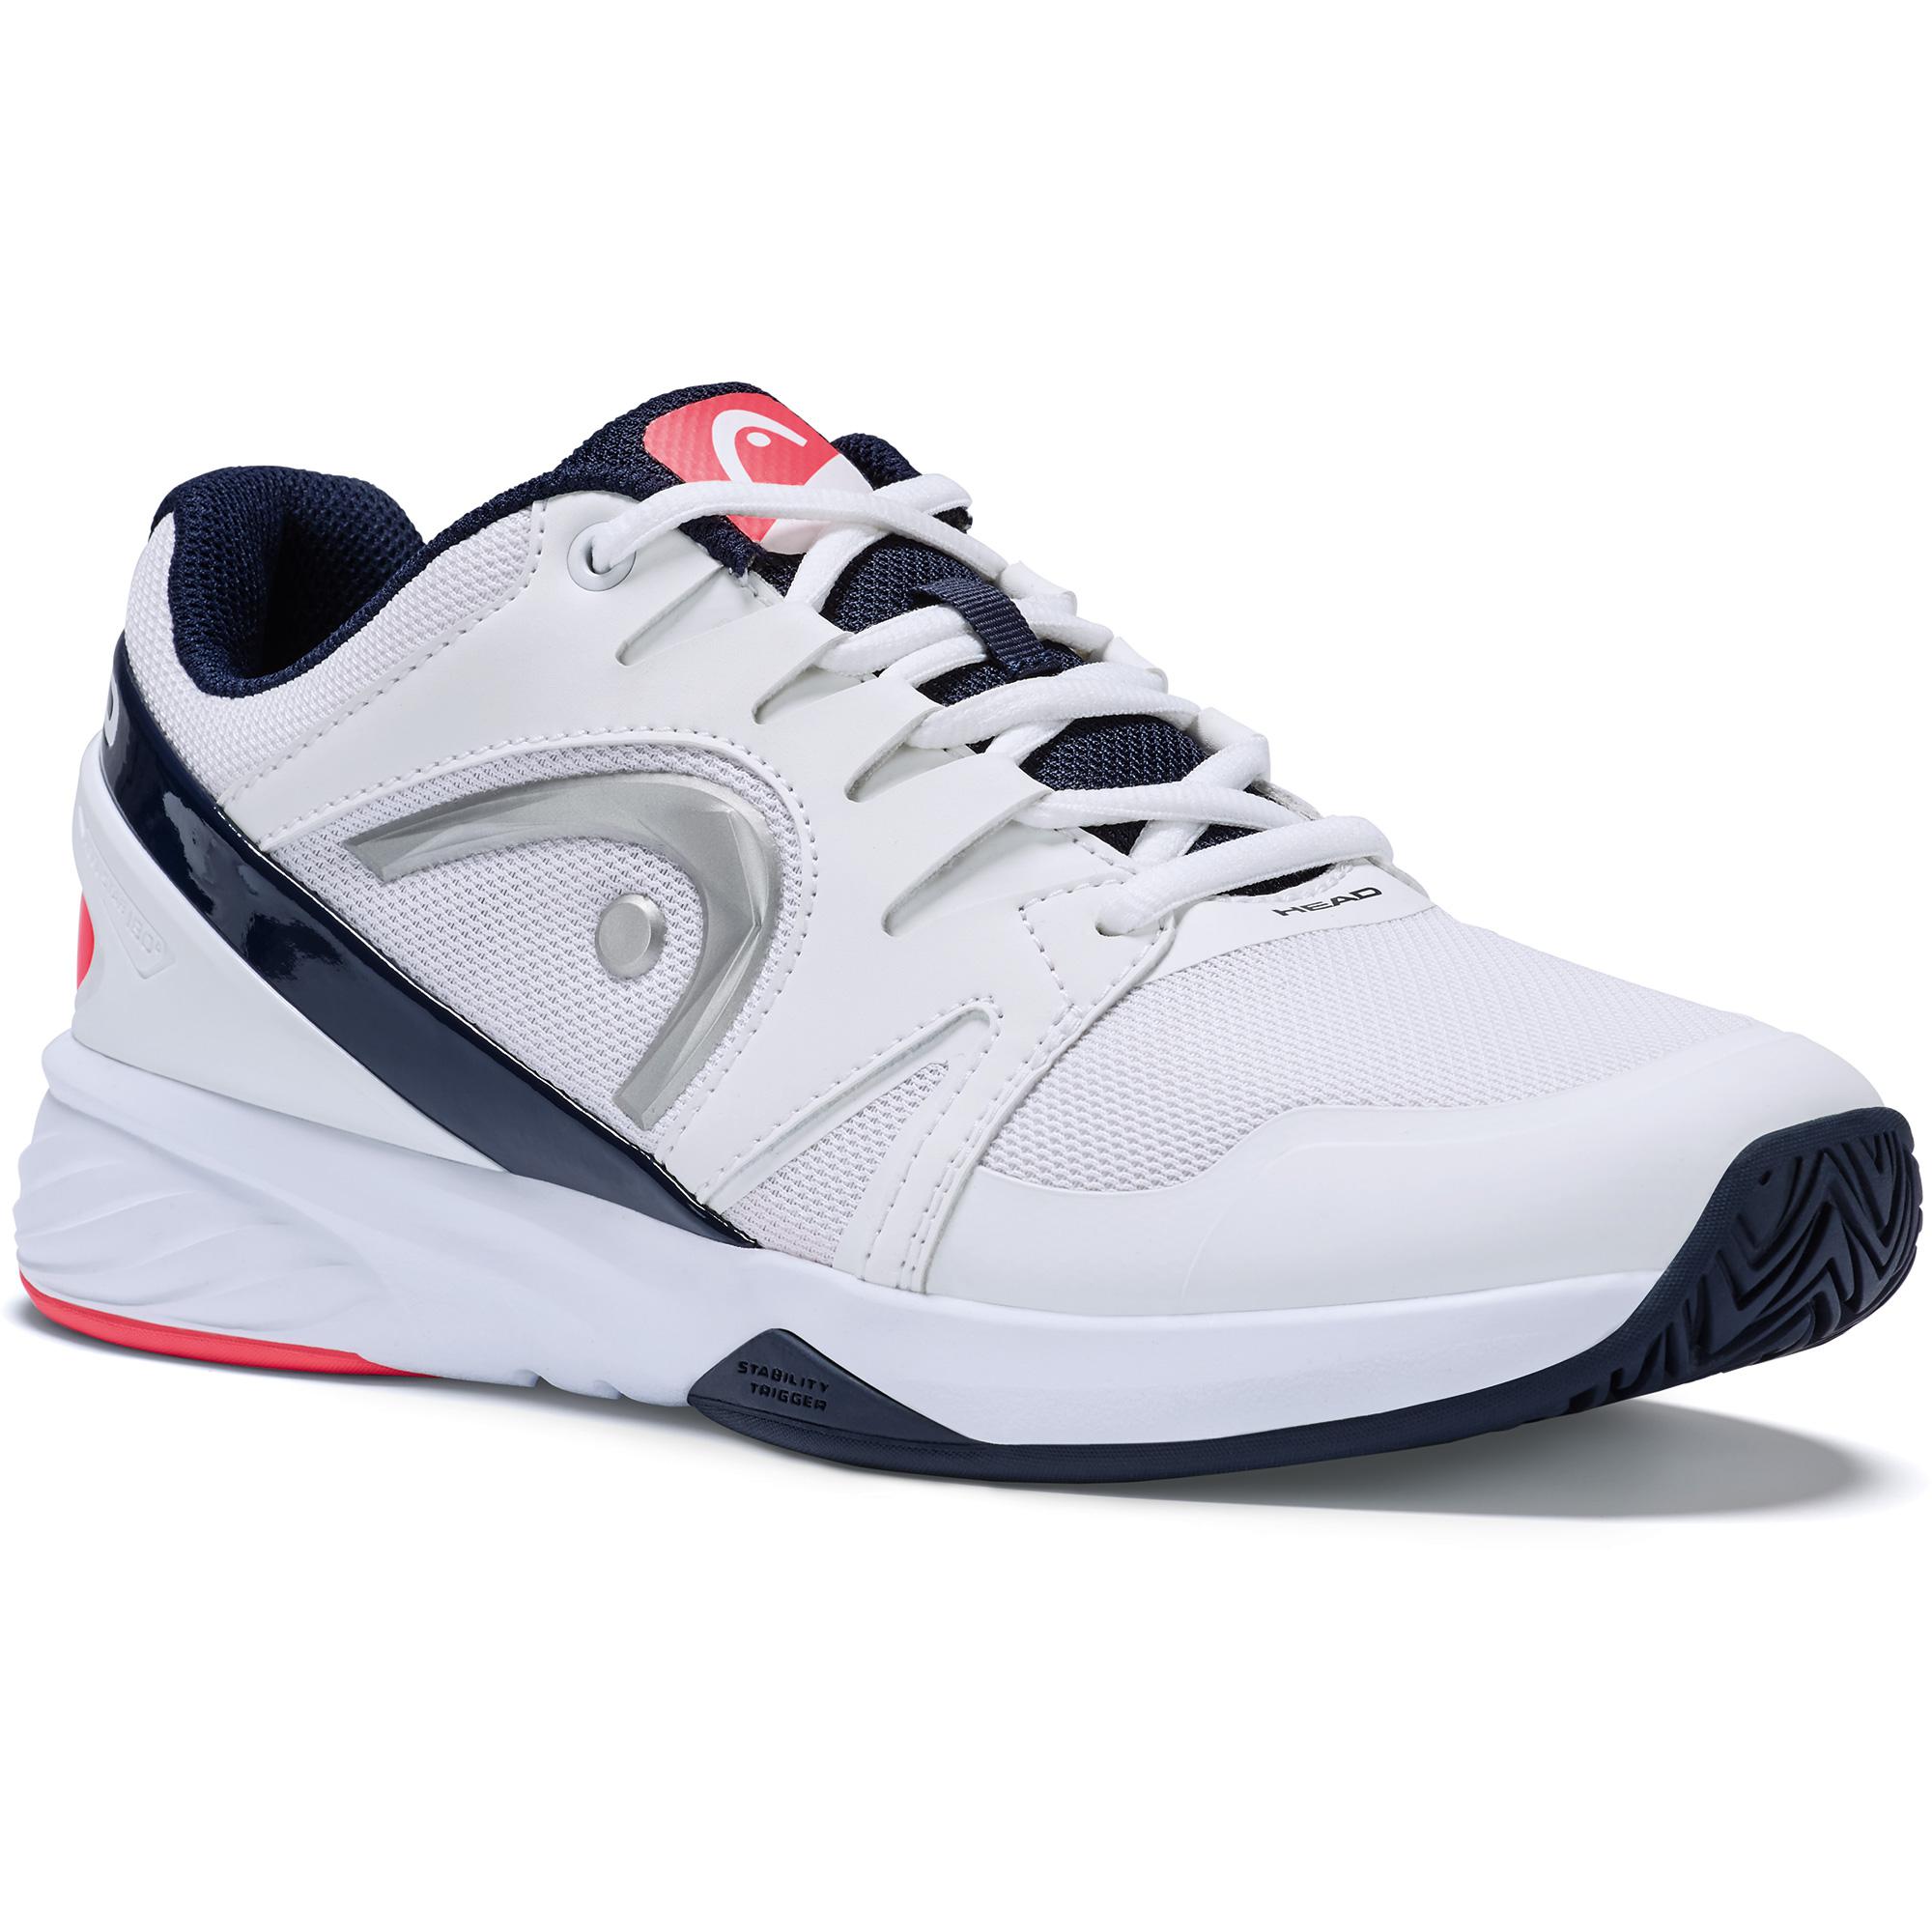 White/Coral Auth Dealer Head Sprint Team 2.0 Women's Tennis Shoes Sneakers 